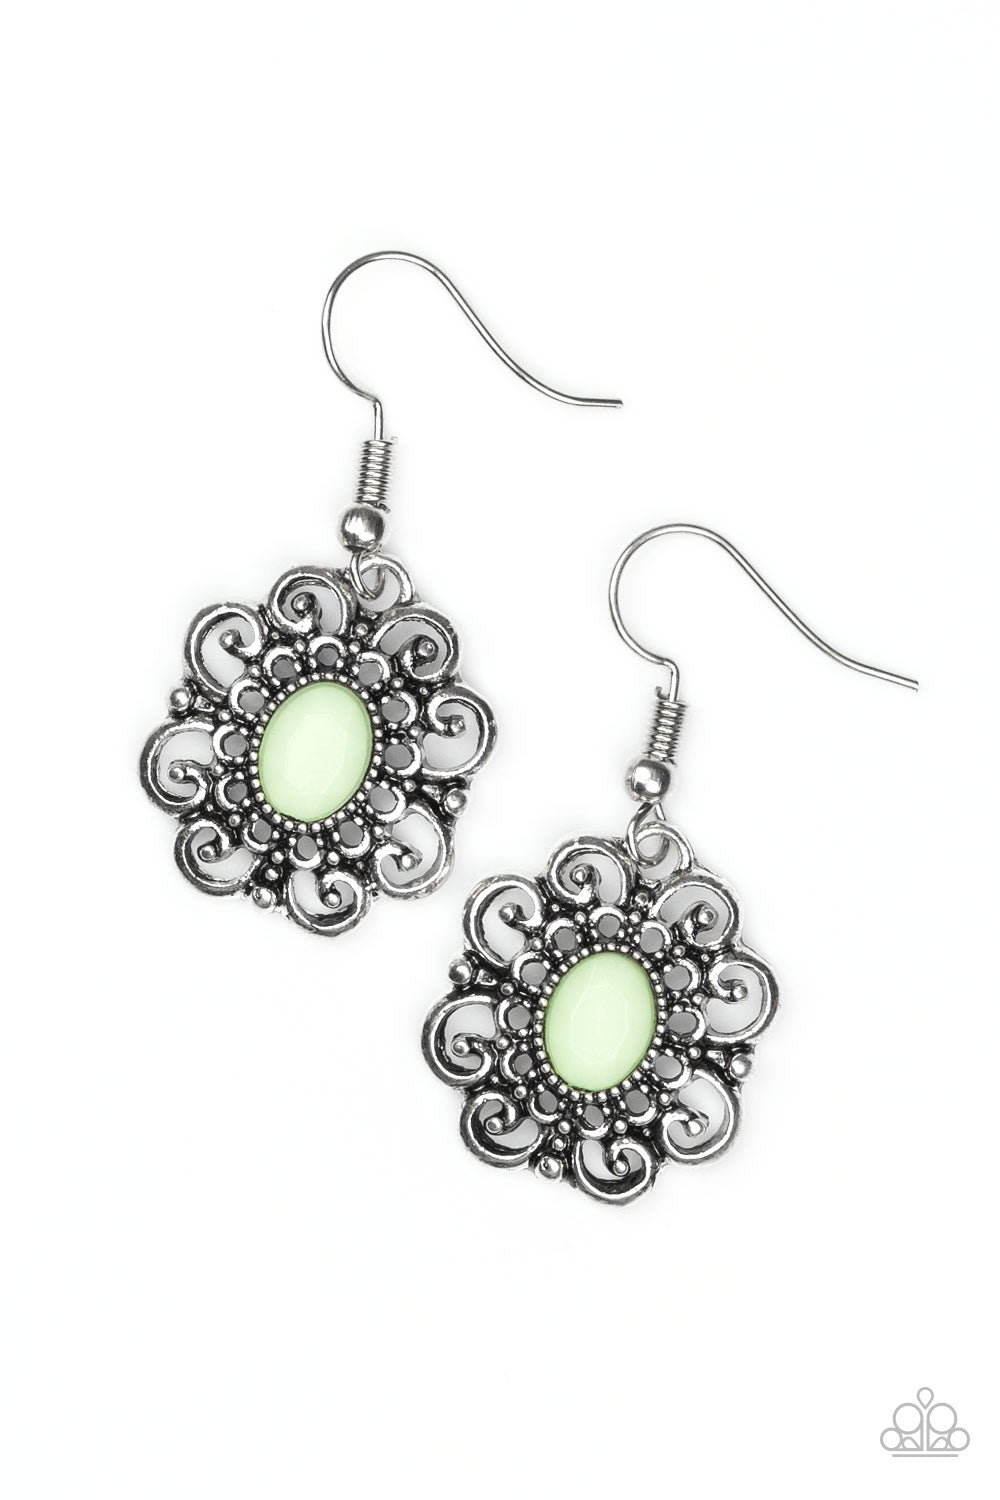 FIRST AND FOREMOST FLOWERS - GREEN MINT GREEN FLOWER FLORAL SCALLOPED DAINTY EARRINGS